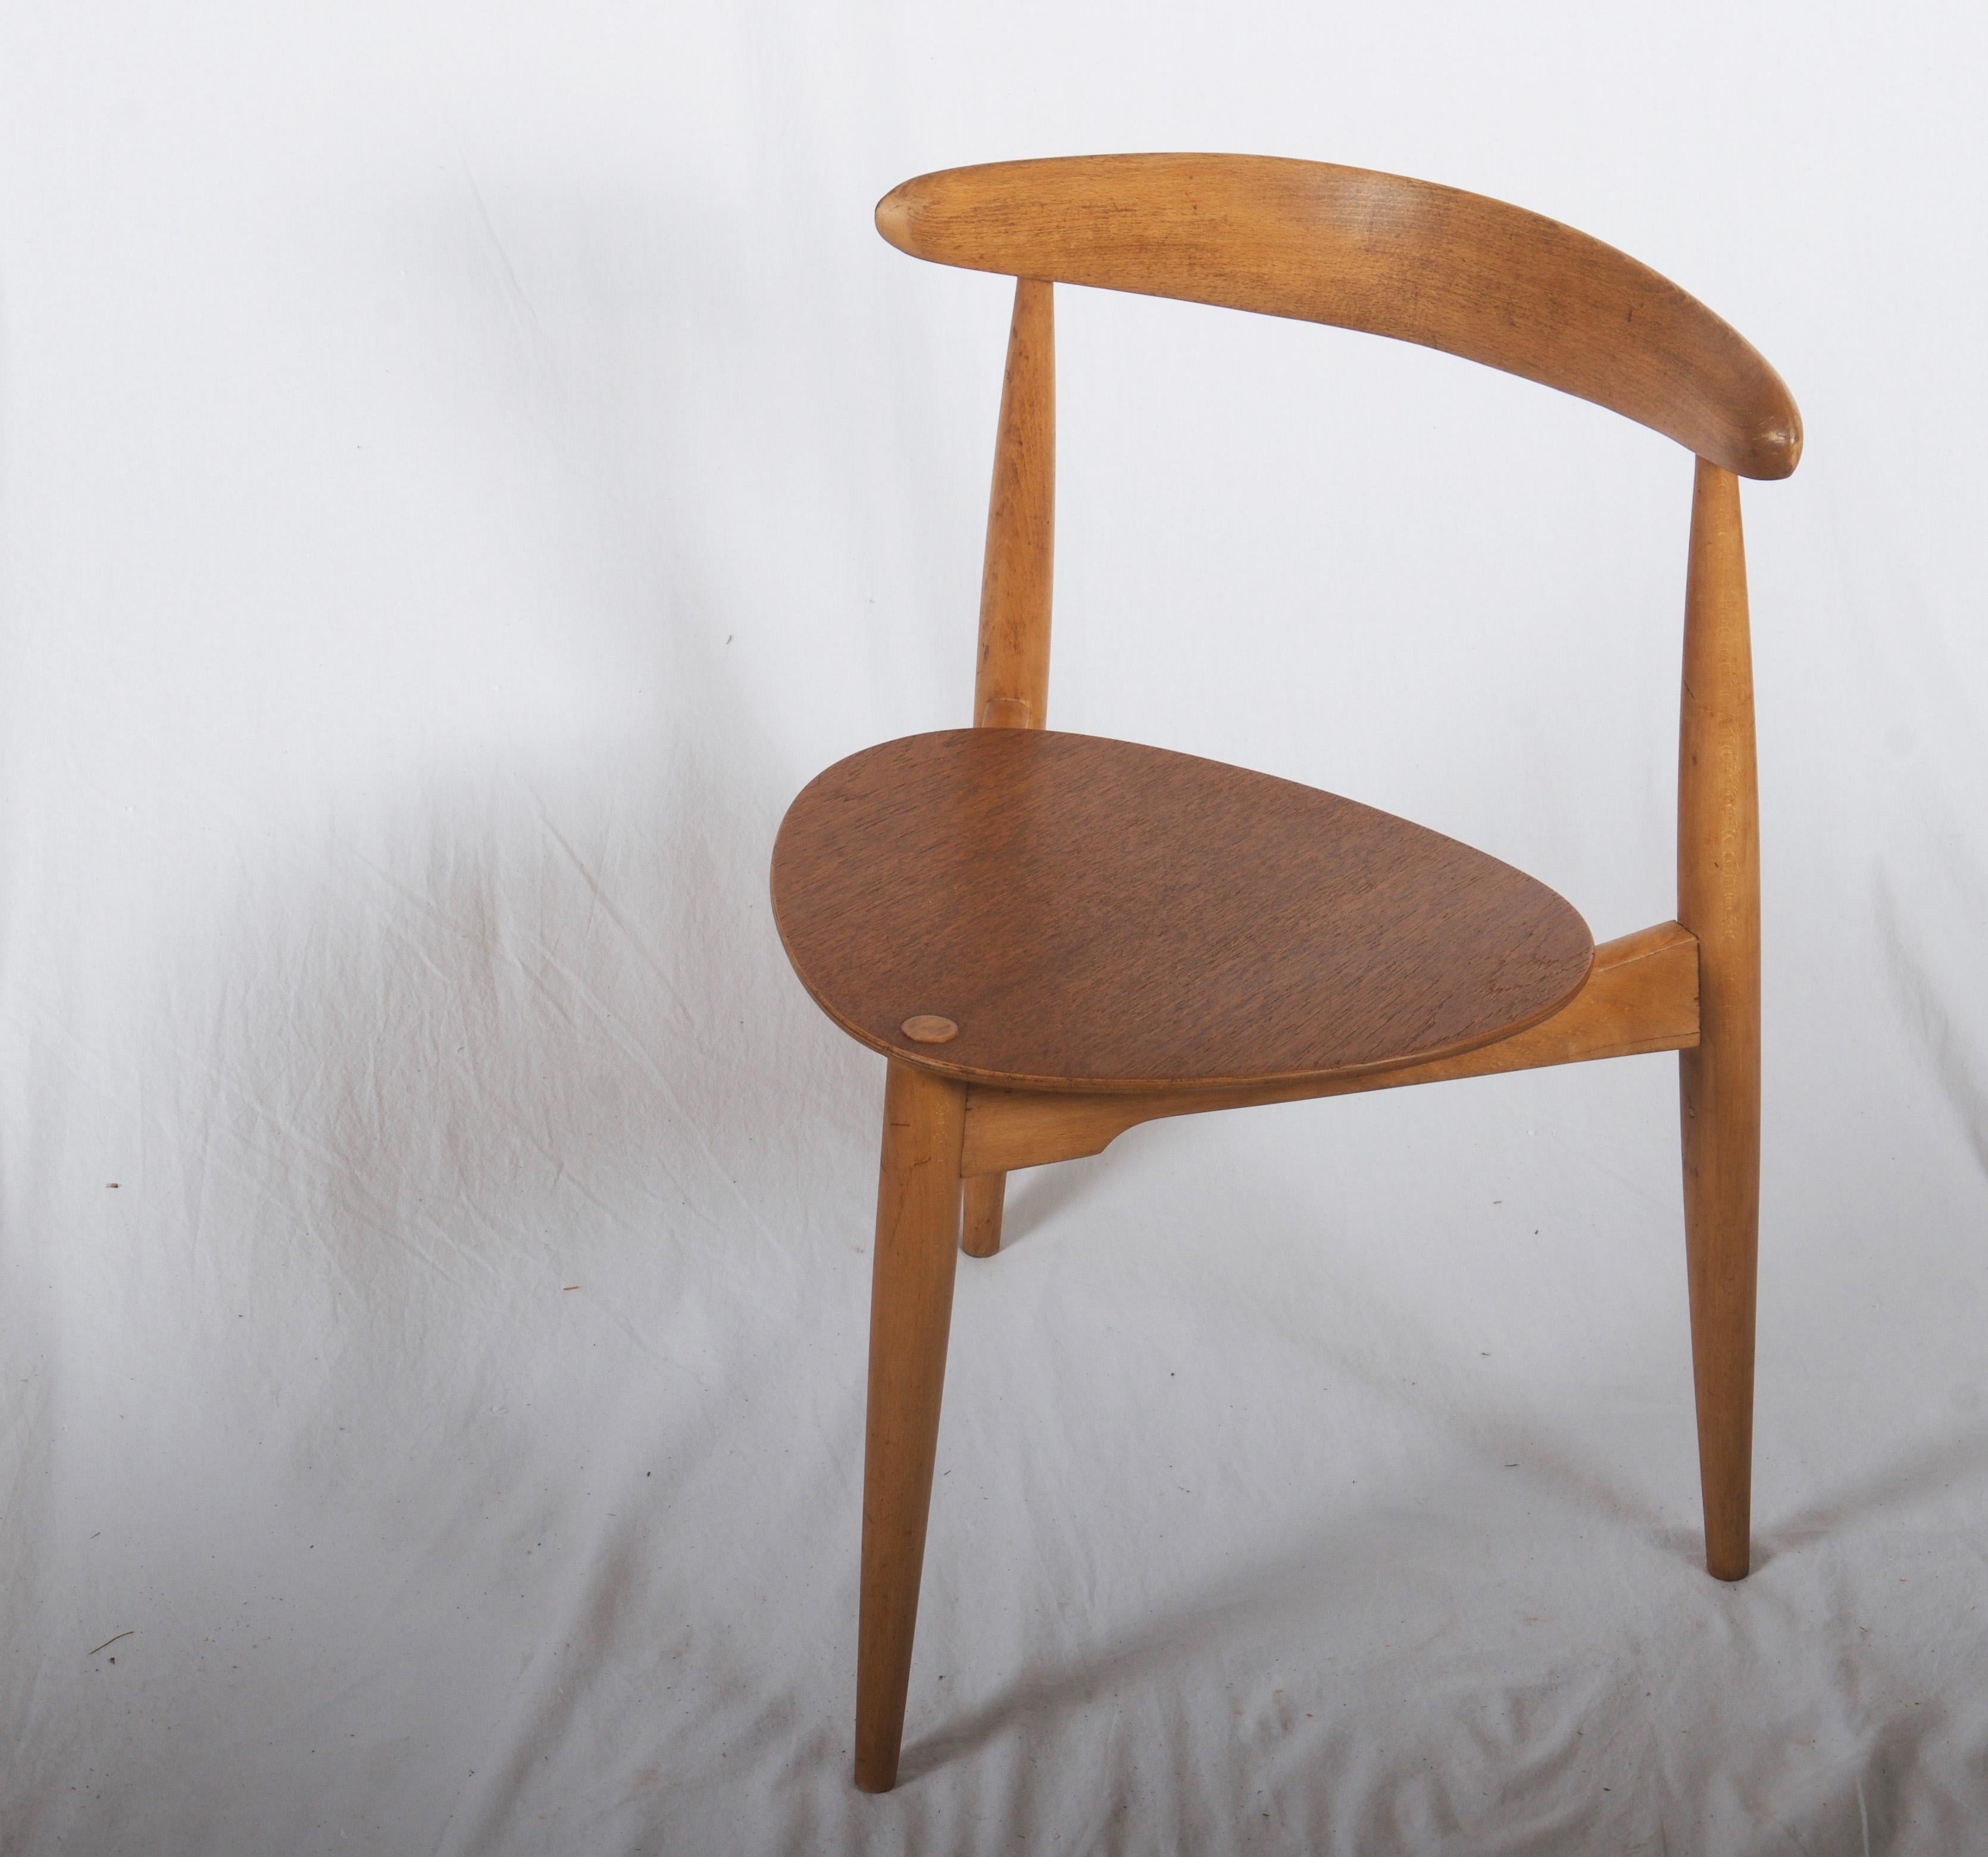 Hans J. Wegner stackable ‘heart’ tripod chairs, the seat made of the veneered teak frame and top rail of oak. Designed in 1952. Produced by Fritz Hansen, model FH 4103.
Literature. Noritsugu Oda: 'Danish Chairs' p. 118.
Signs of natural patina.